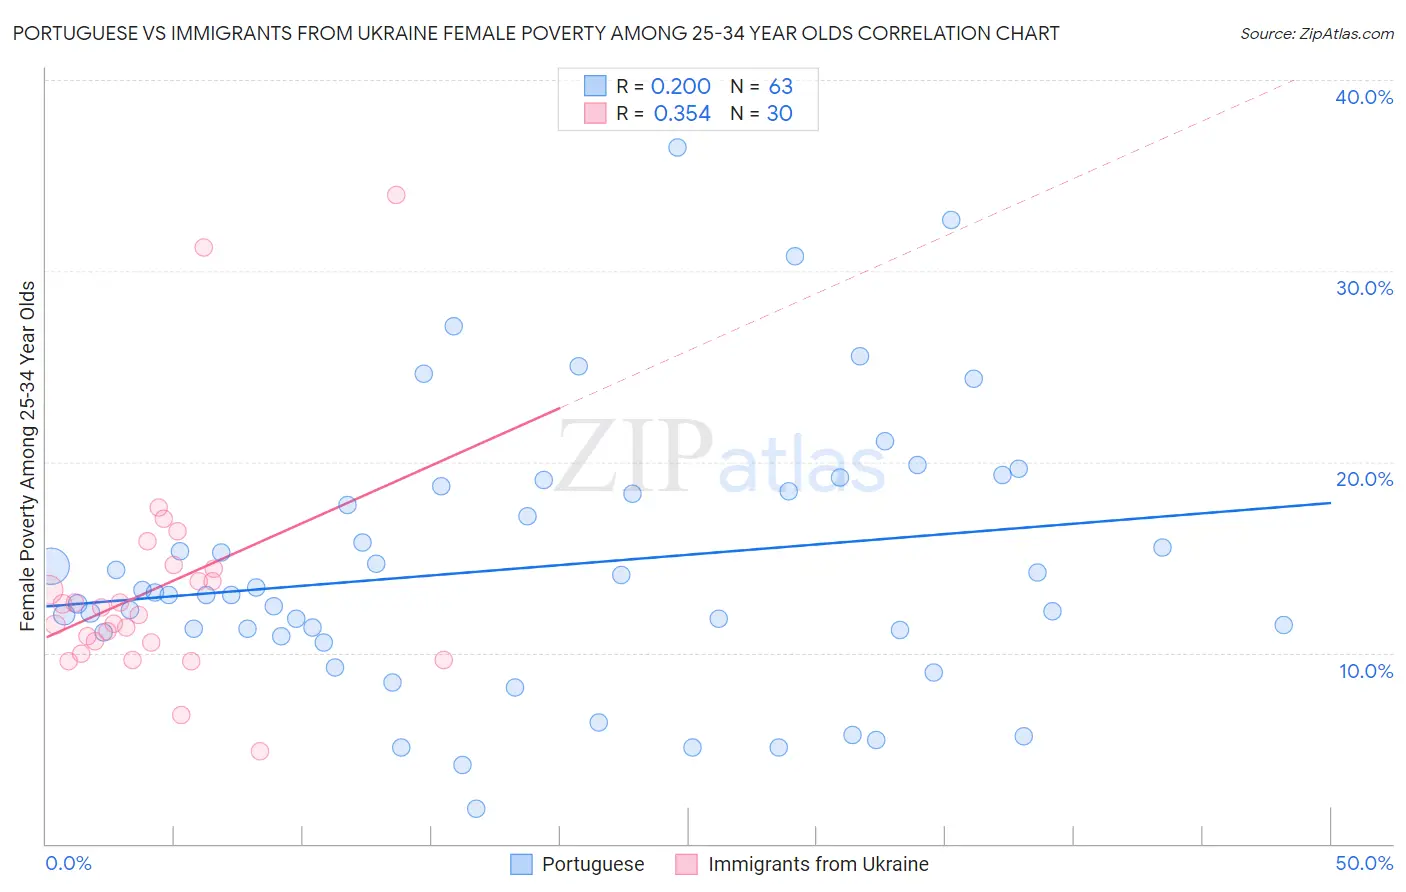 Portuguese vs Immigrants from Ukraine Female Poverty Among 25-34 Year Olds